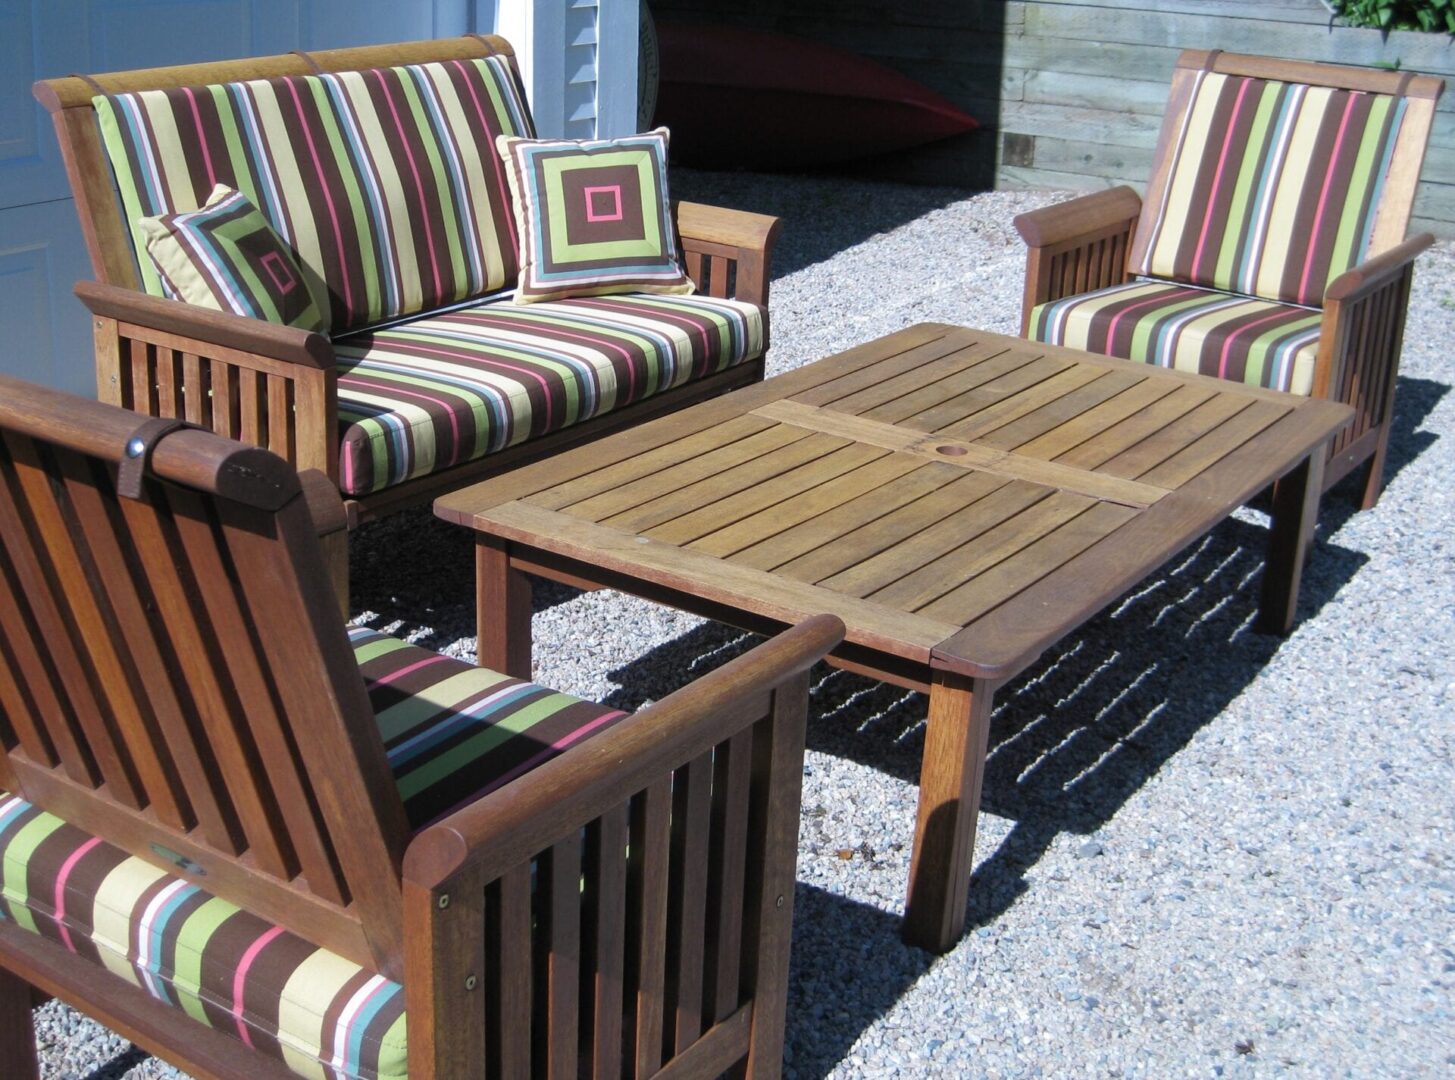 A patio set with striped cushions and table.